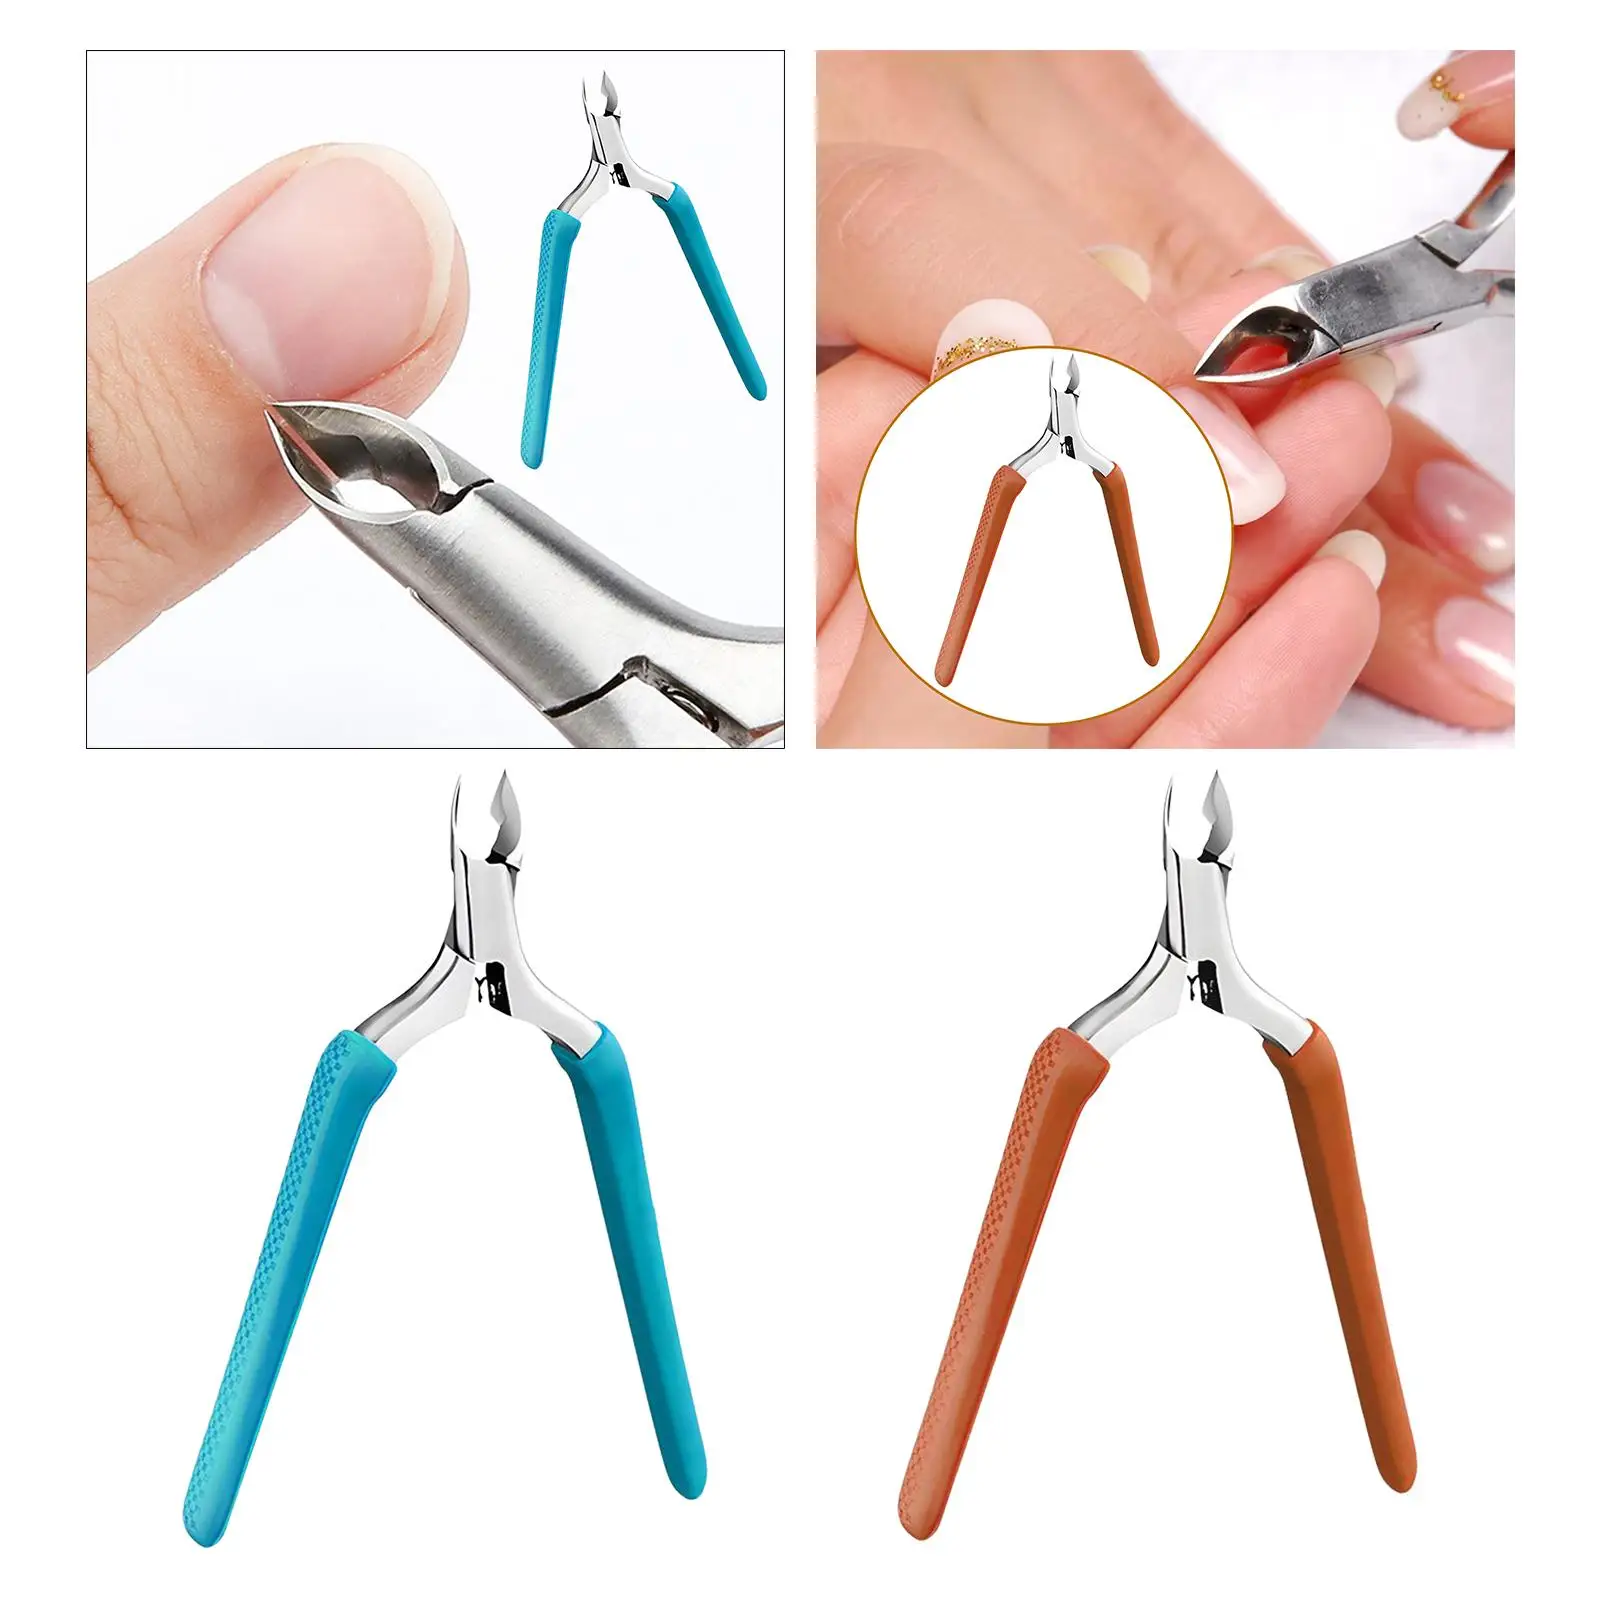 Cuticle Nipper Sturdy with Cuticle Pusher Cutters Anti Slip Professional Nail Cuticle Trimmer for Fingernails and Toenails